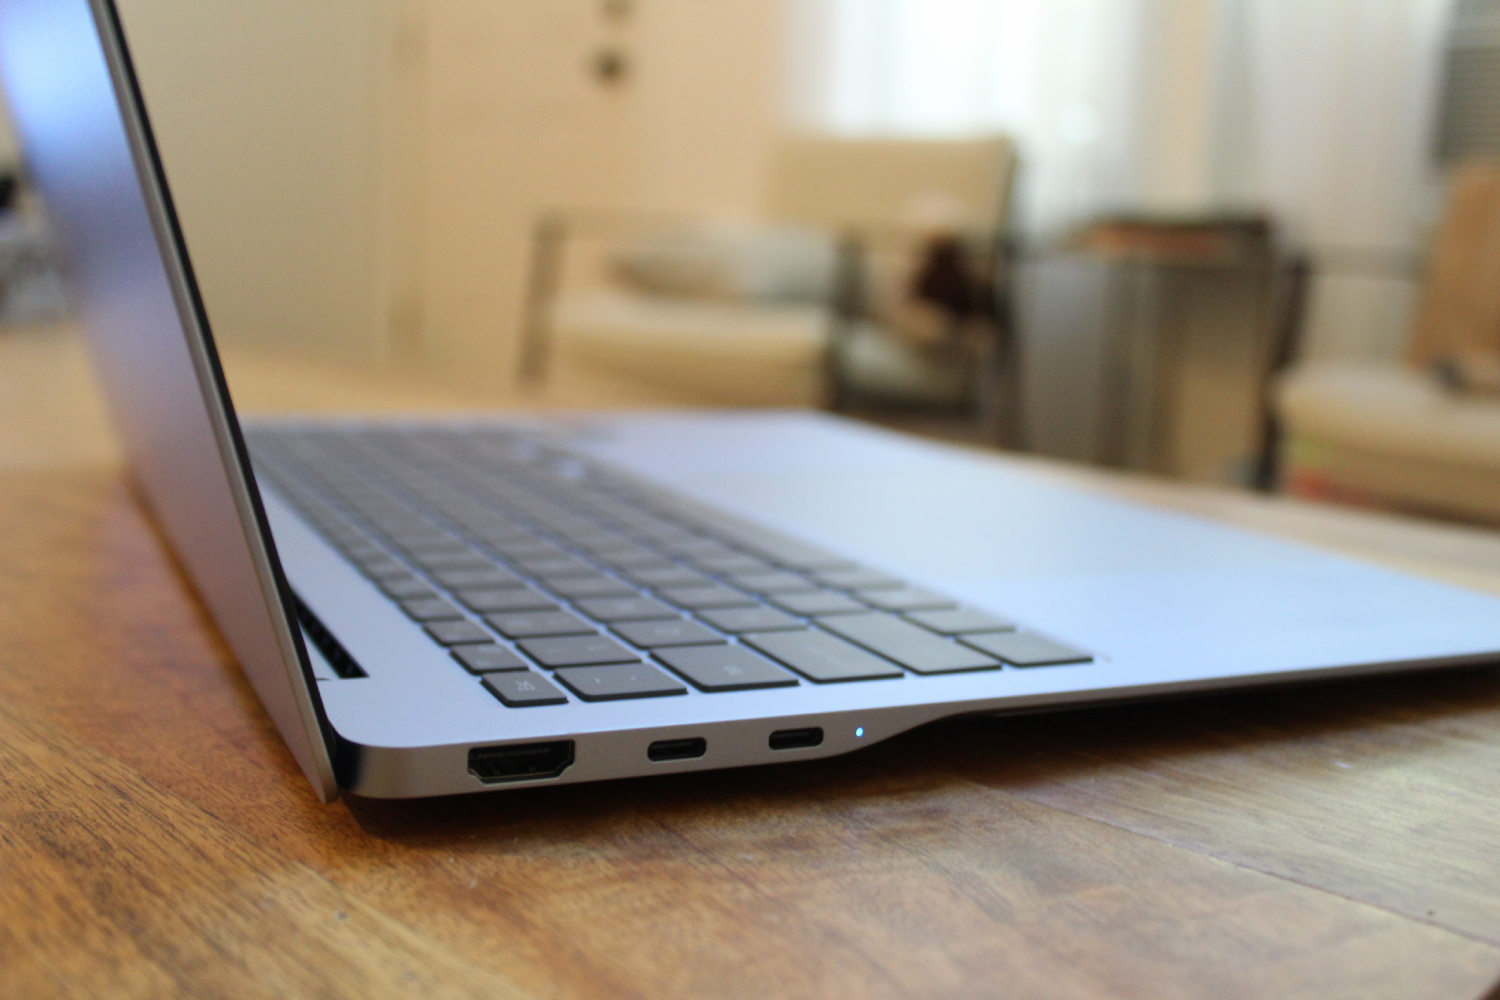 The ports on the side of the Galaxy Book4 Edge.